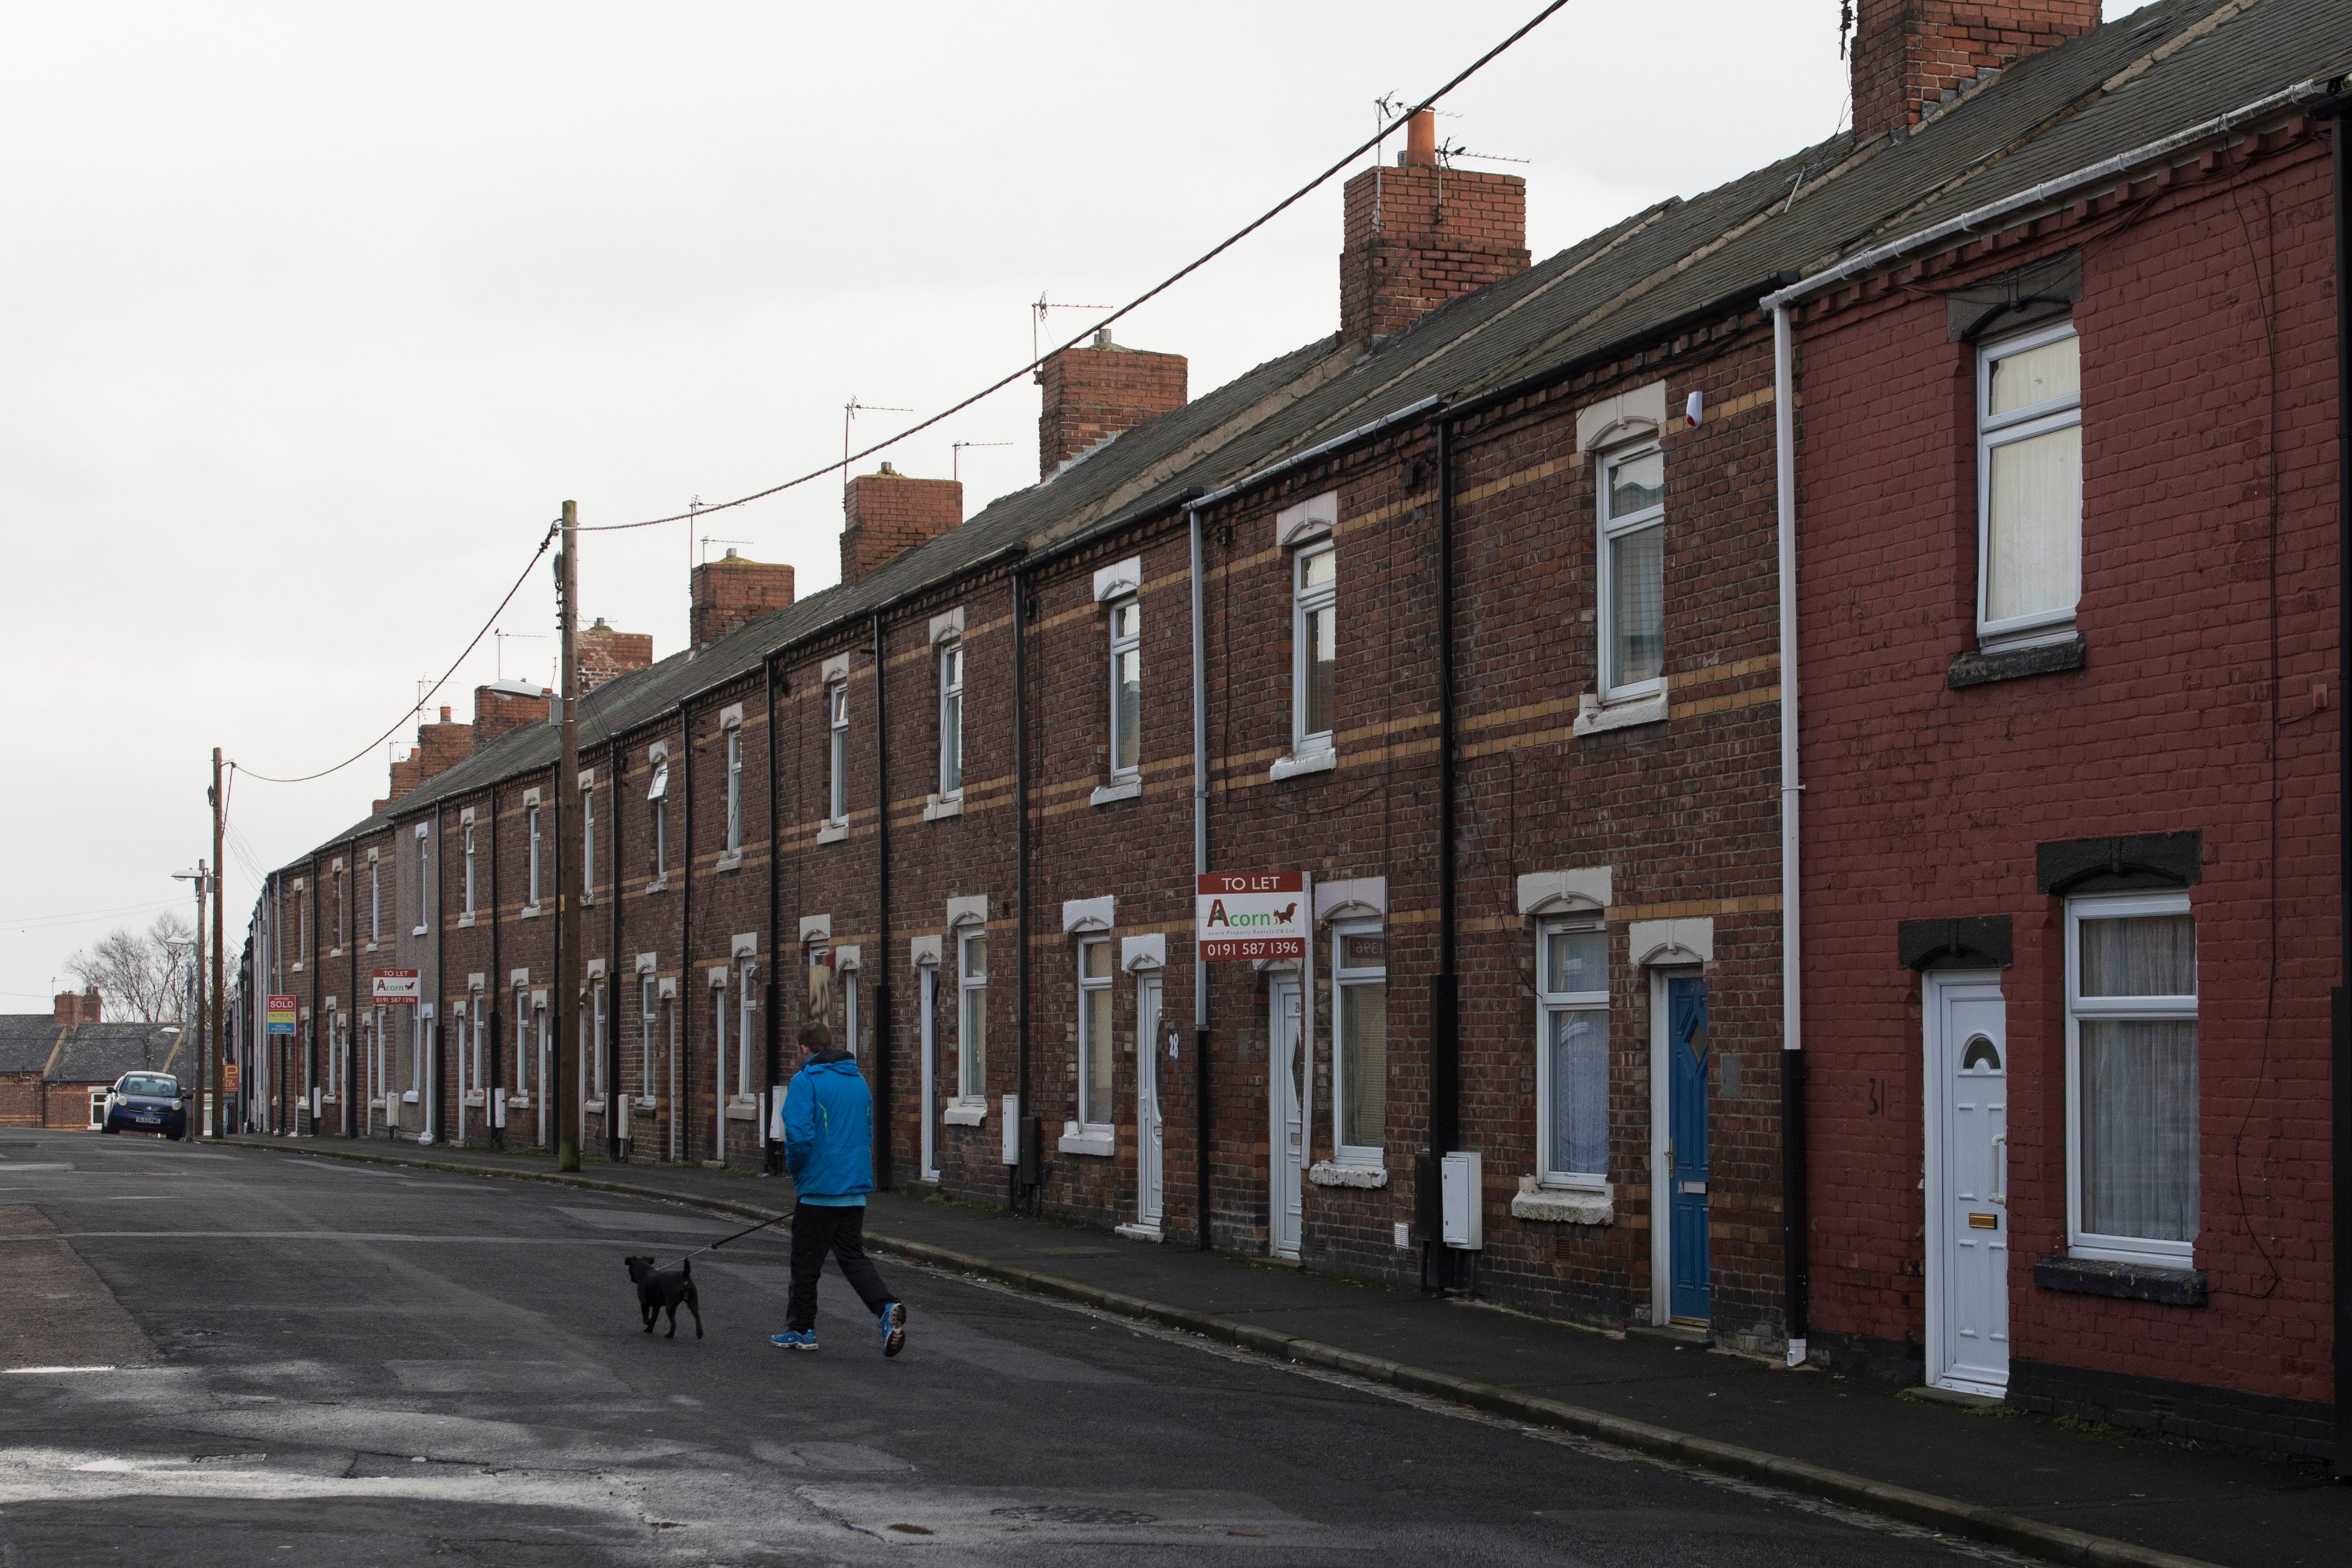 People in the northeastern town of Horden (pictured) may be falling ill several years younger than their southern counterparts